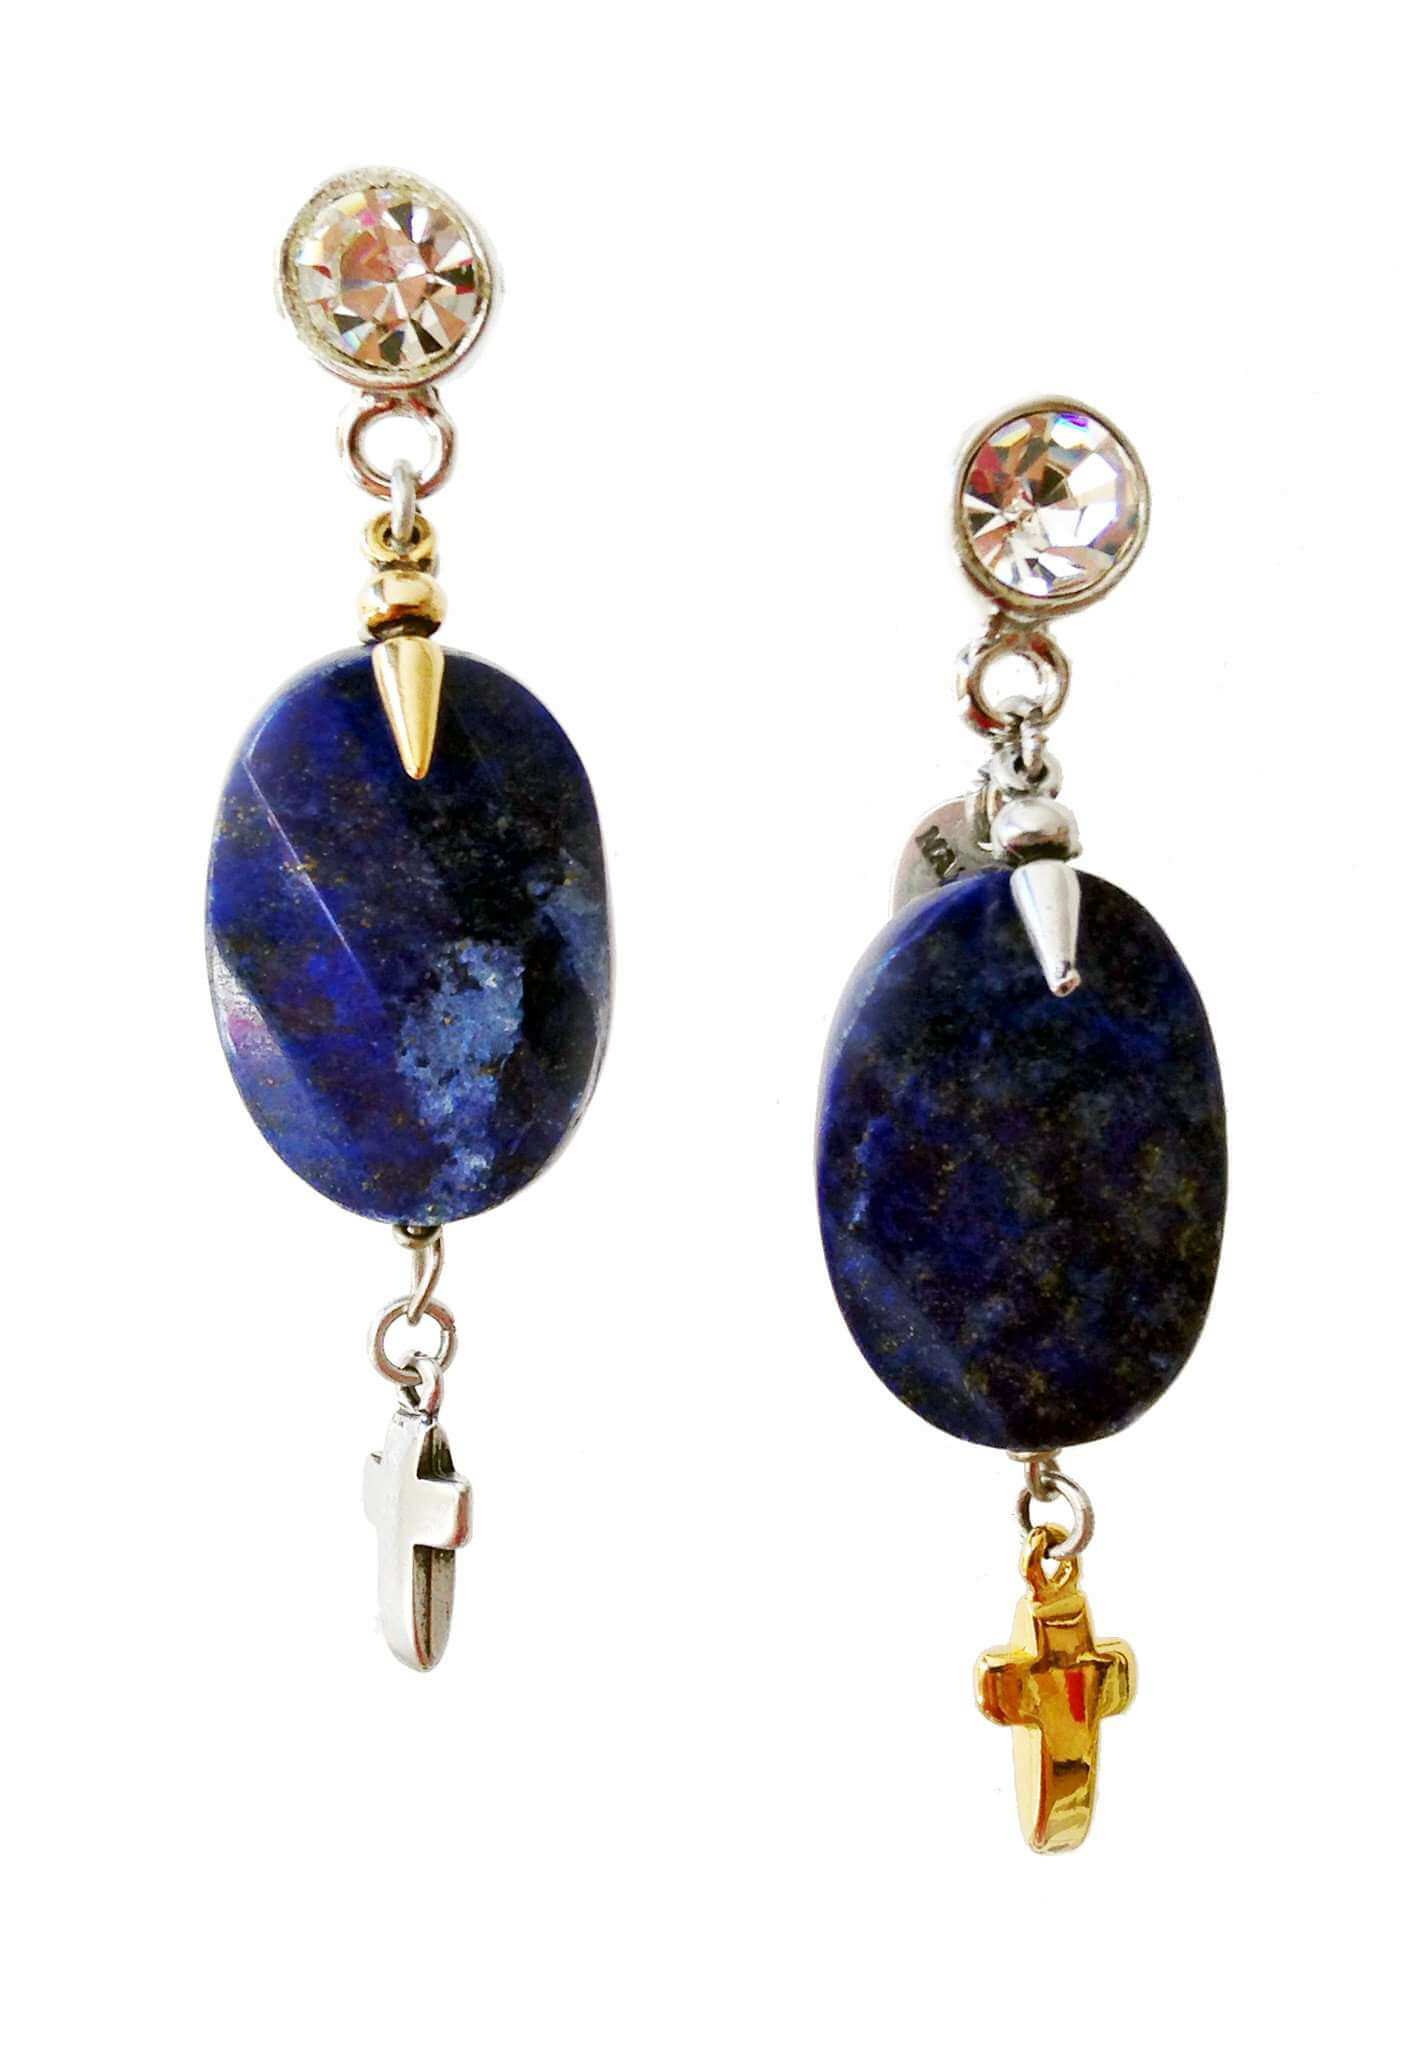 Dangle and drop earrings with blue lapis lazuli stones, rhinestones, brass and charms. Boho chic earrings, Boho chic jewelry. - Maiden-Art